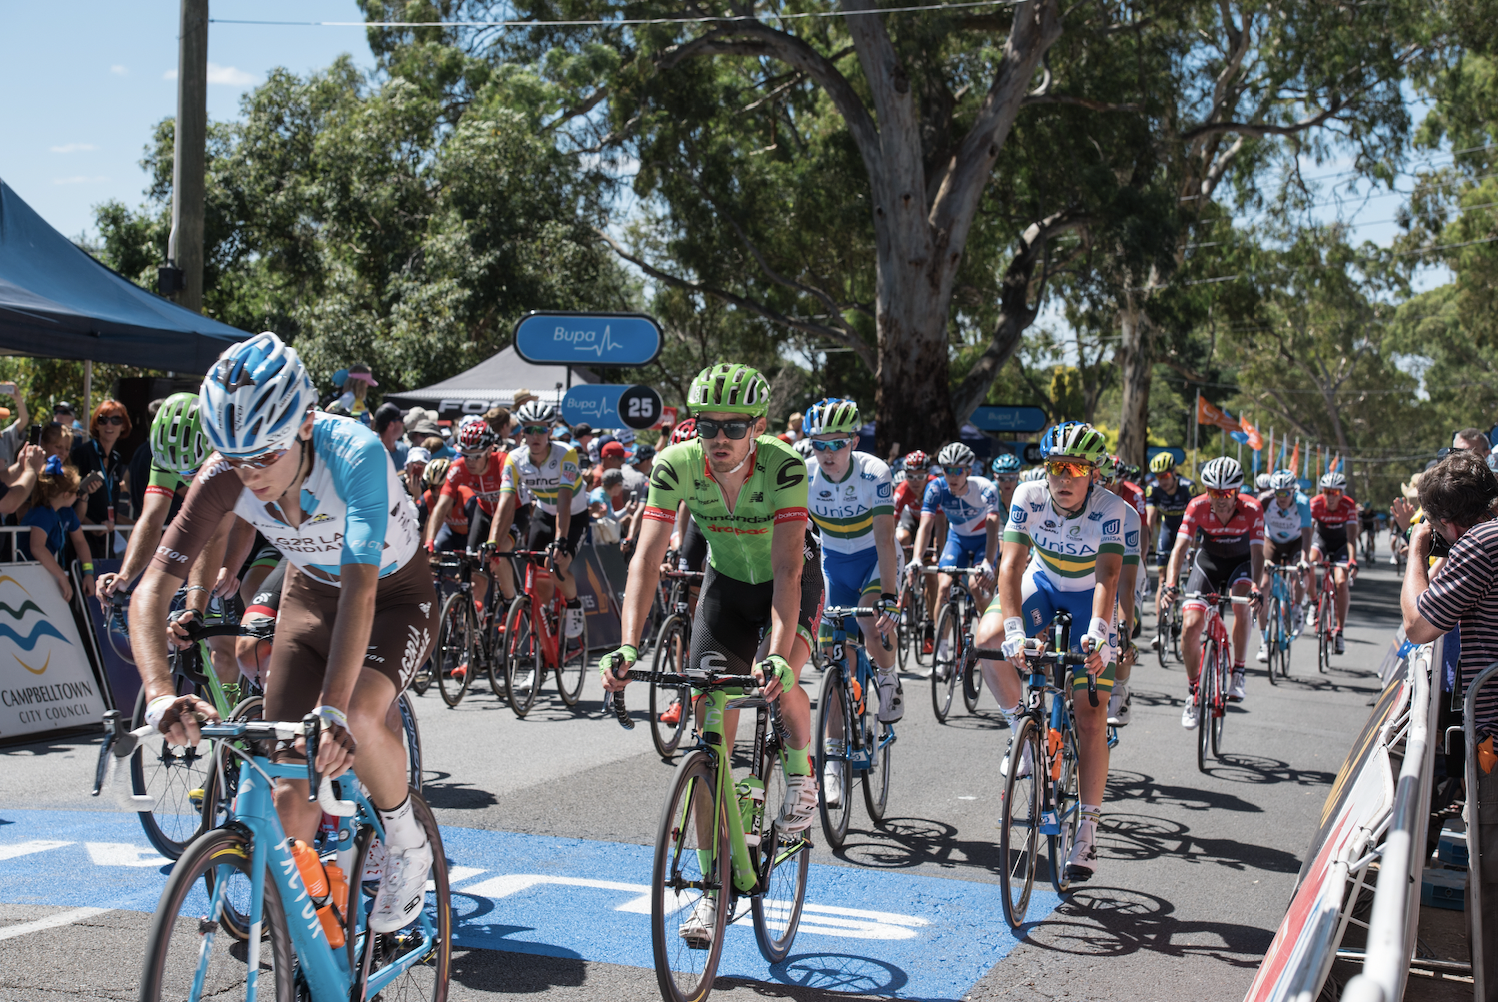 Getting active is easy in Campbelltown South Australia - the city even hosts a leg of the Tour Down Under